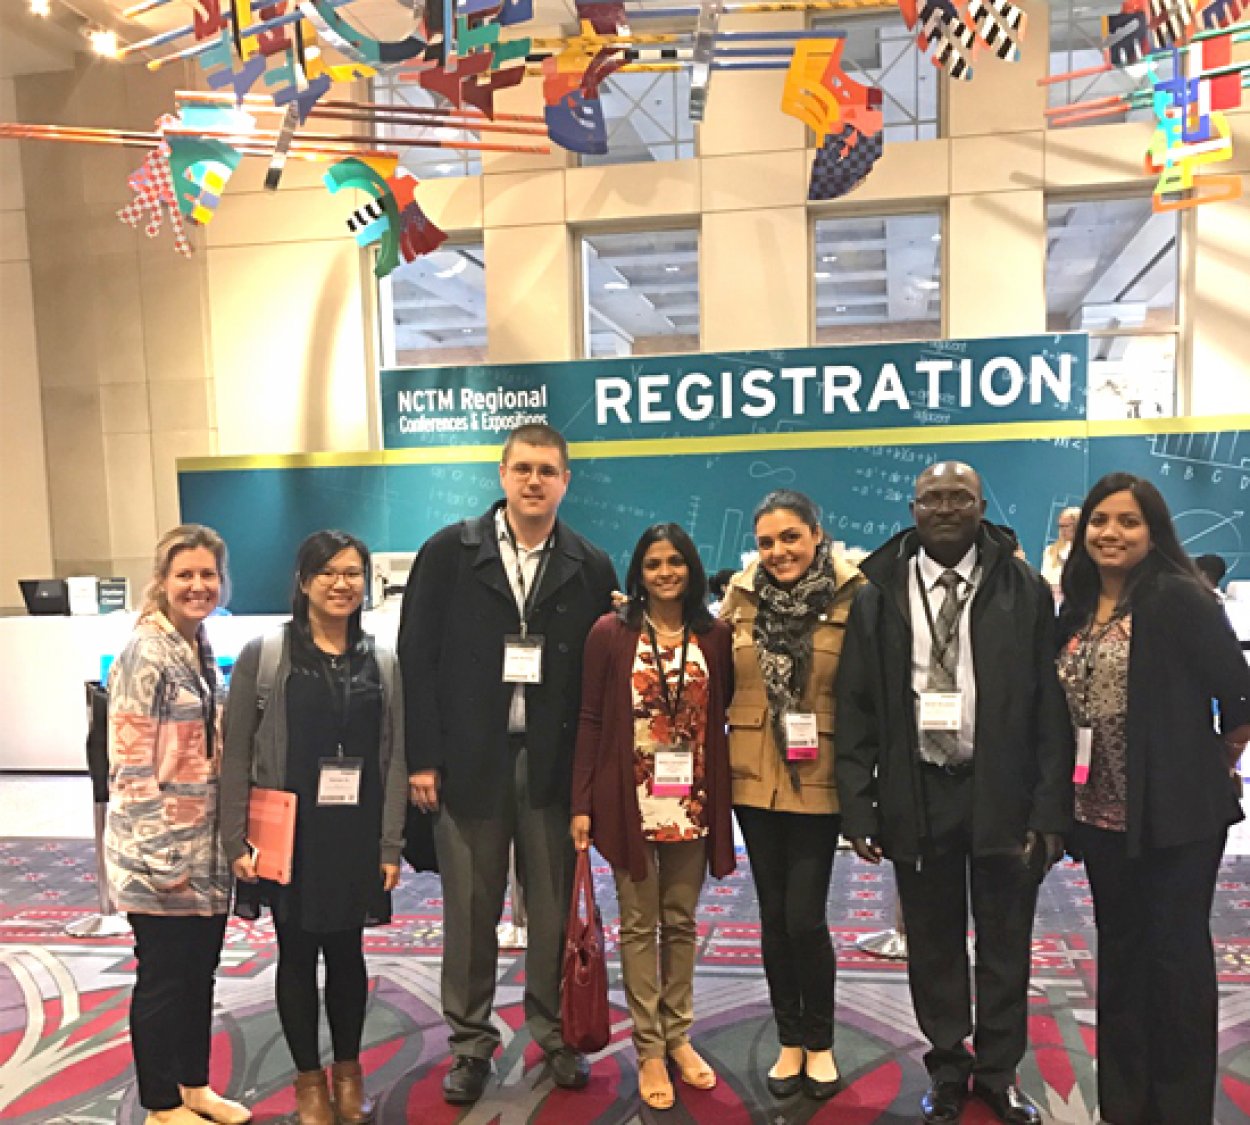 Mathematics Education EdD And PhD Students Present At The NCTM Regional